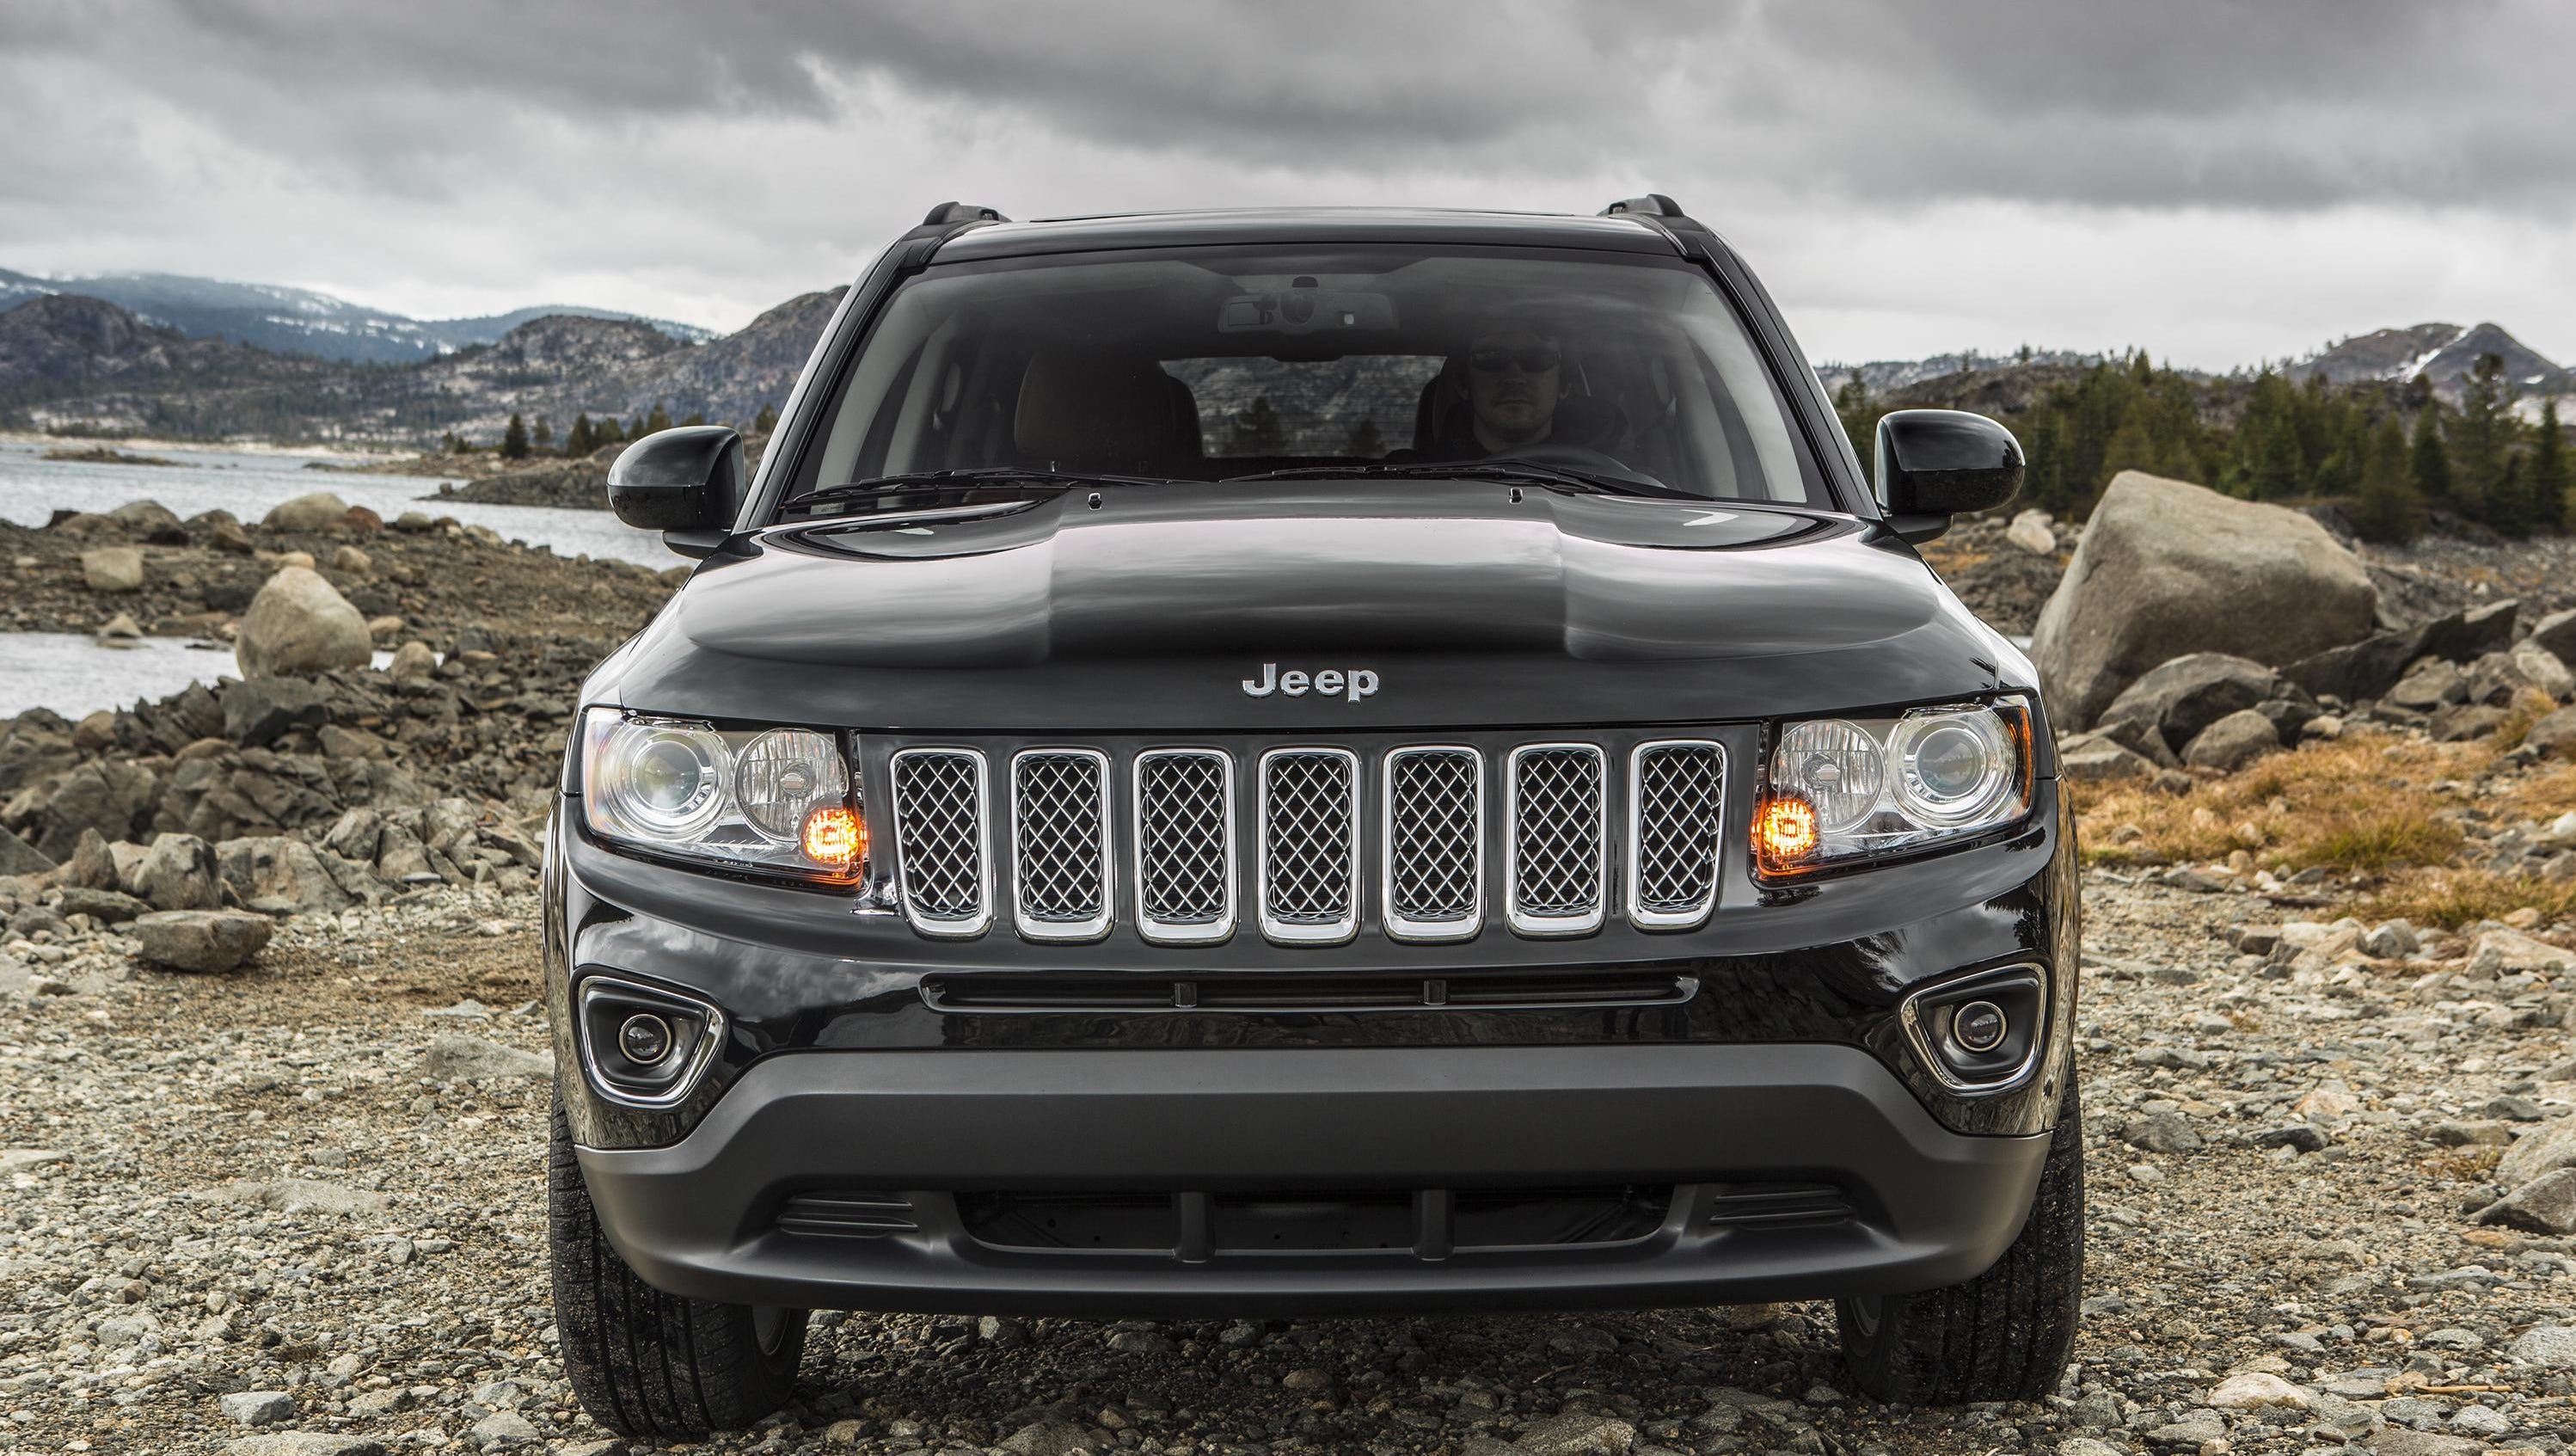 The 2016 Jeep Compass is among autos targeted to replace catalytic converters.